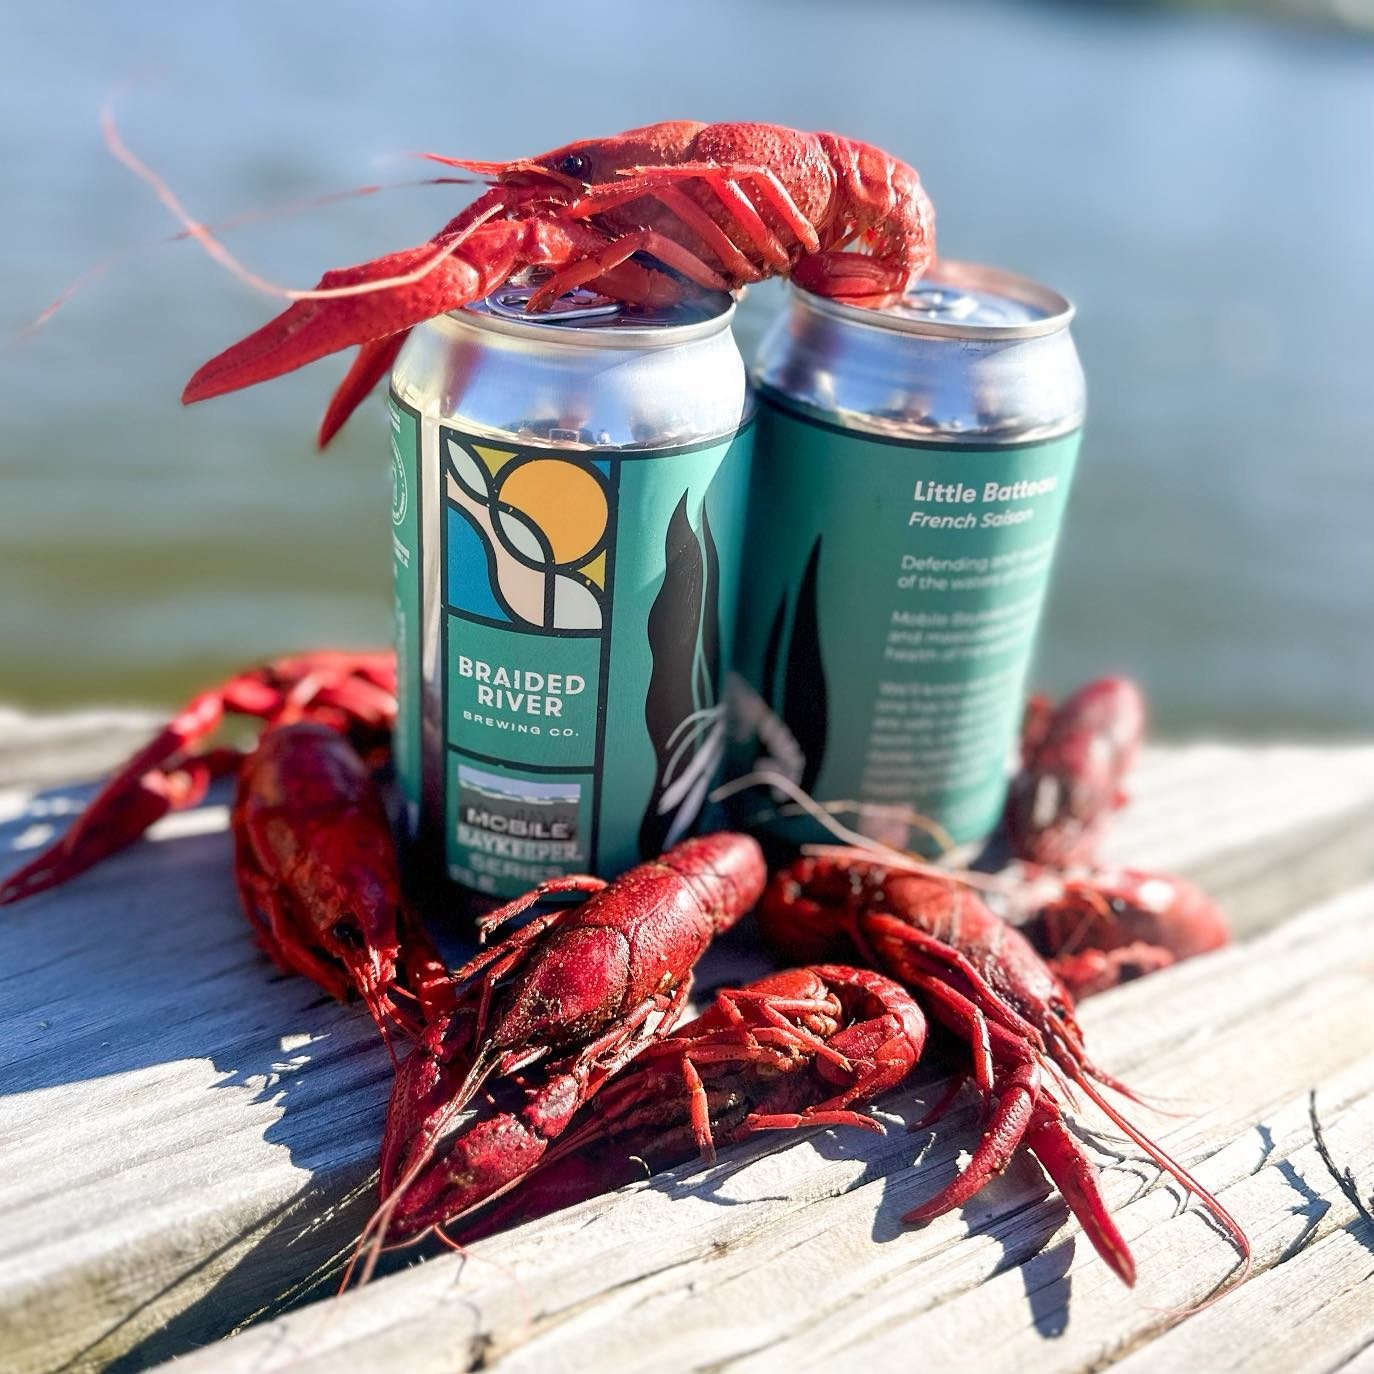 We have TWO DAYS of partying with our friends at Mobile Baykeeper on deck this week!

FRIDAY: The latest release in our Baykeeper Series is here! Little Batteau is a French Saison with peppery, spicy, and citrusy characteristics along with a silky mo